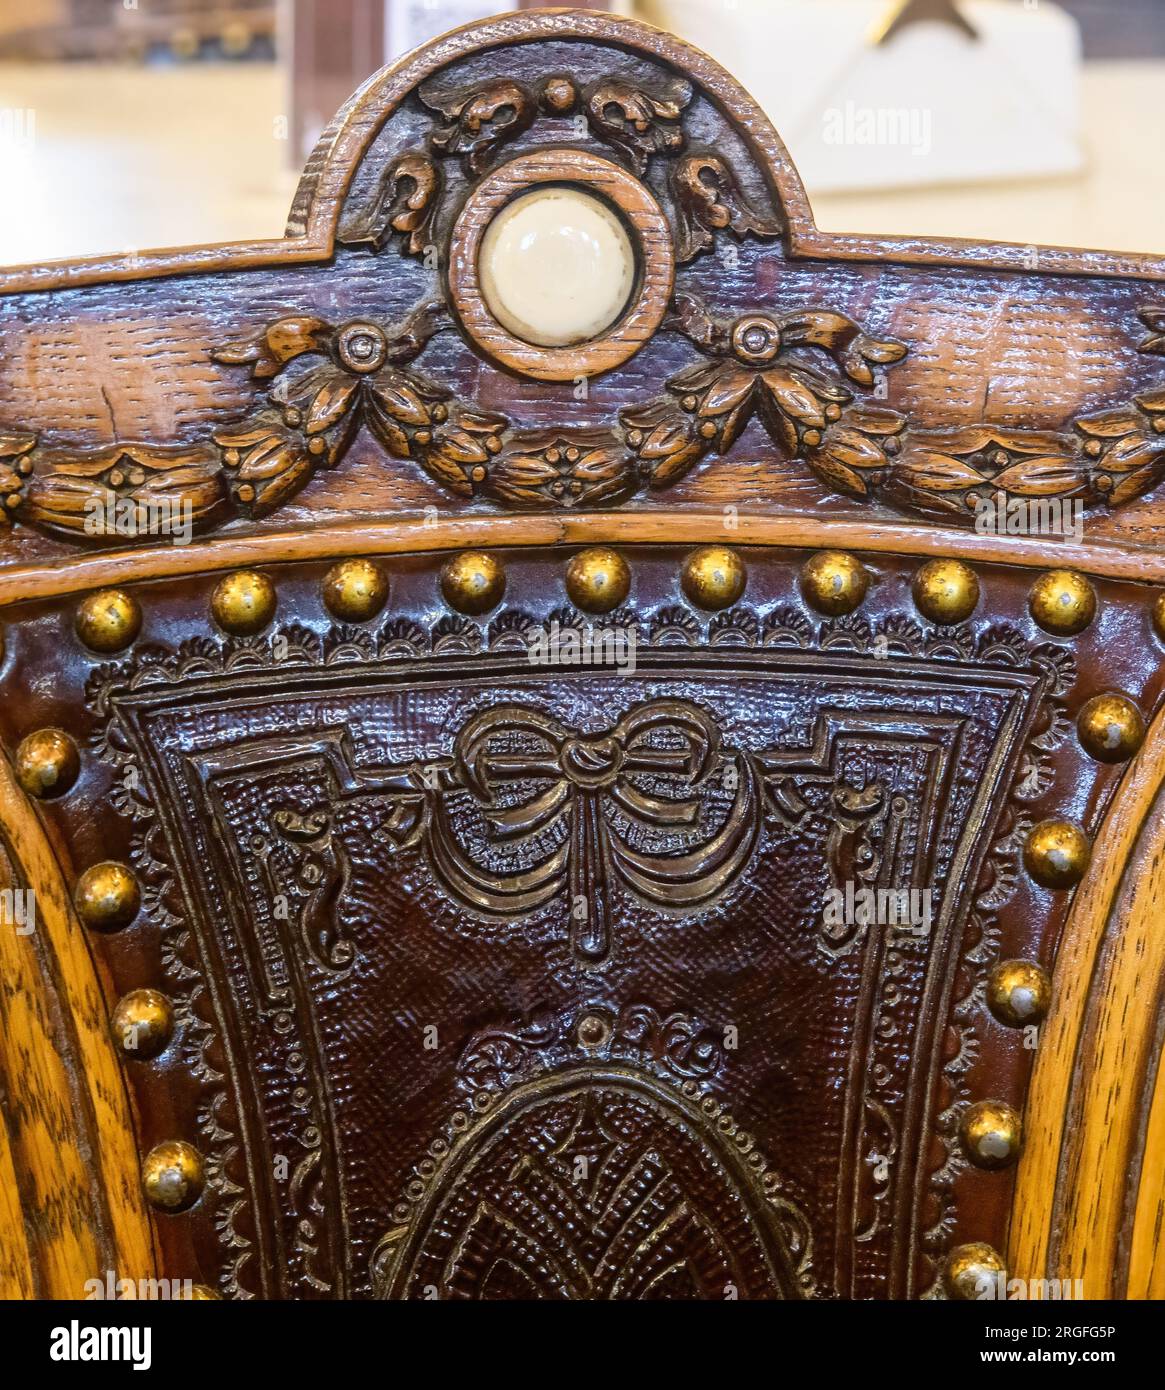 Ancient seat back. The wooden part has decorative carvings. The leather is supported with rivets and has engraved ornaments. Stock Photo